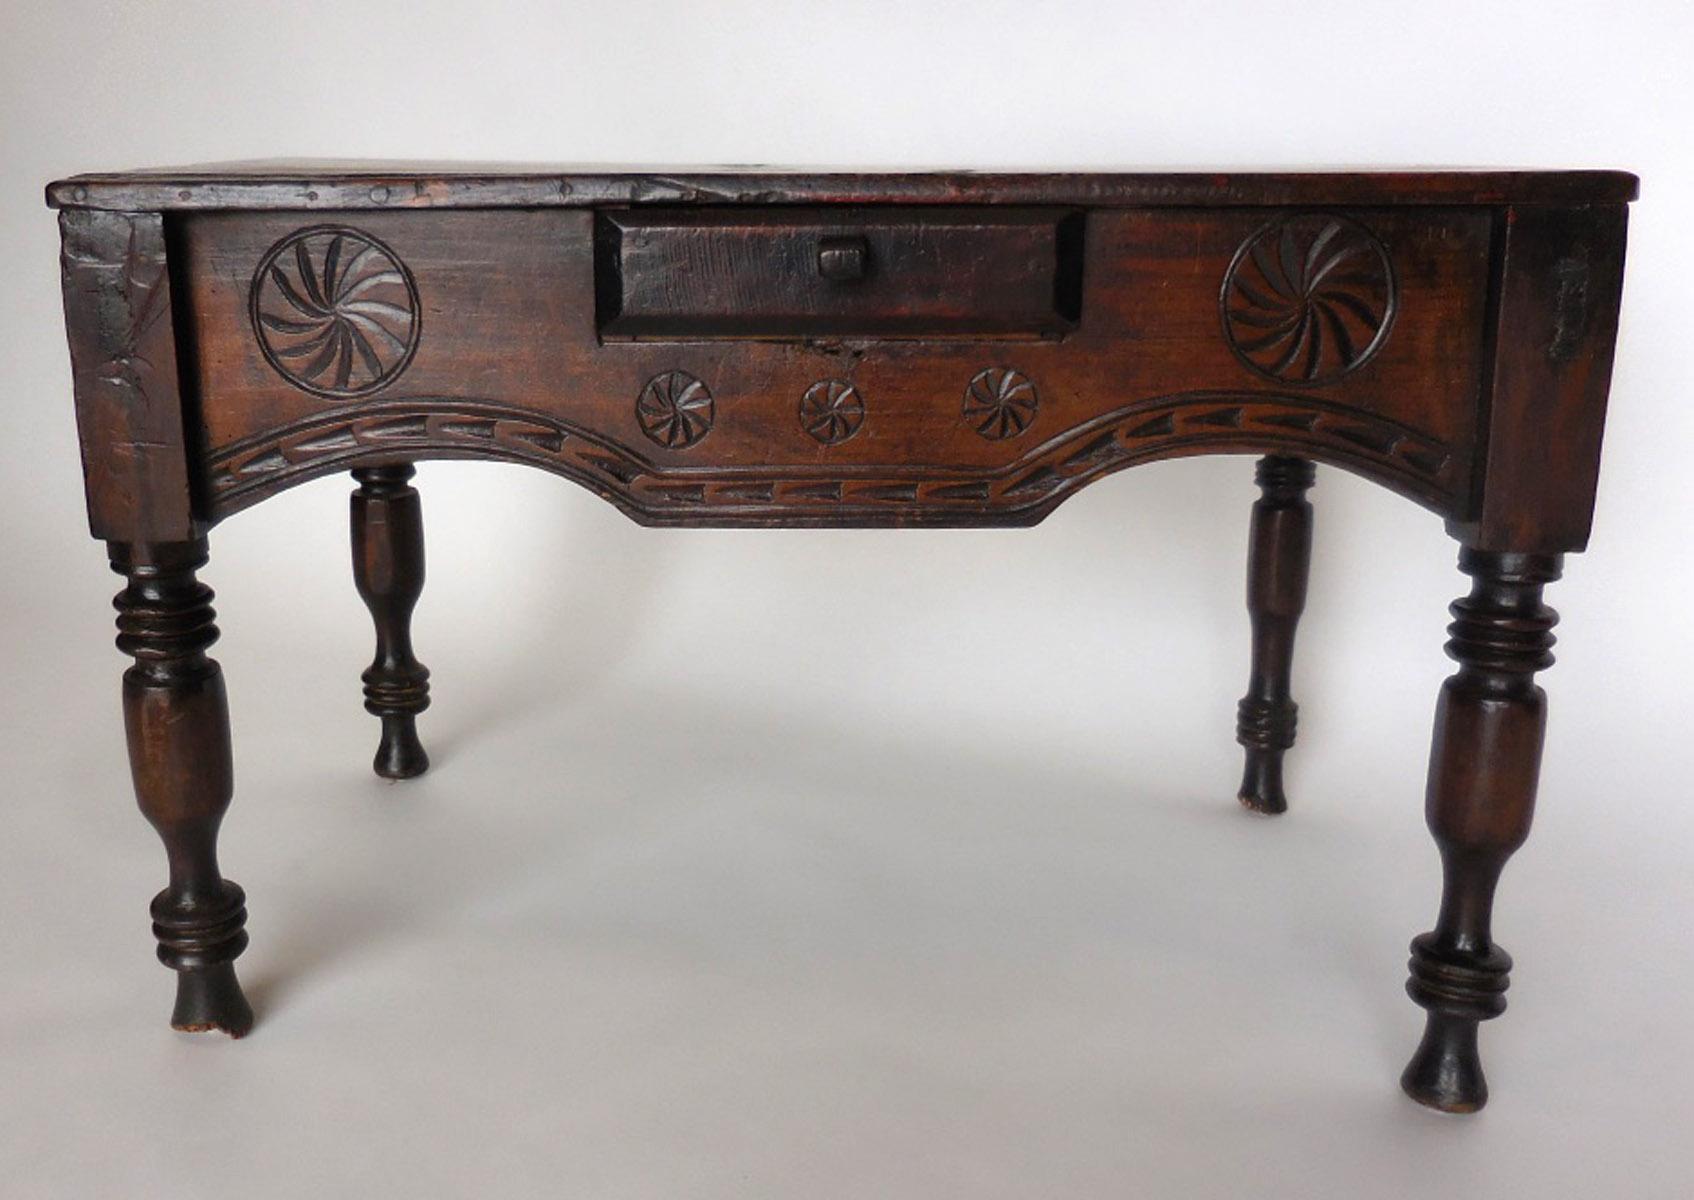 Rustic 19th Century Child's Table with Carvings and Drawer